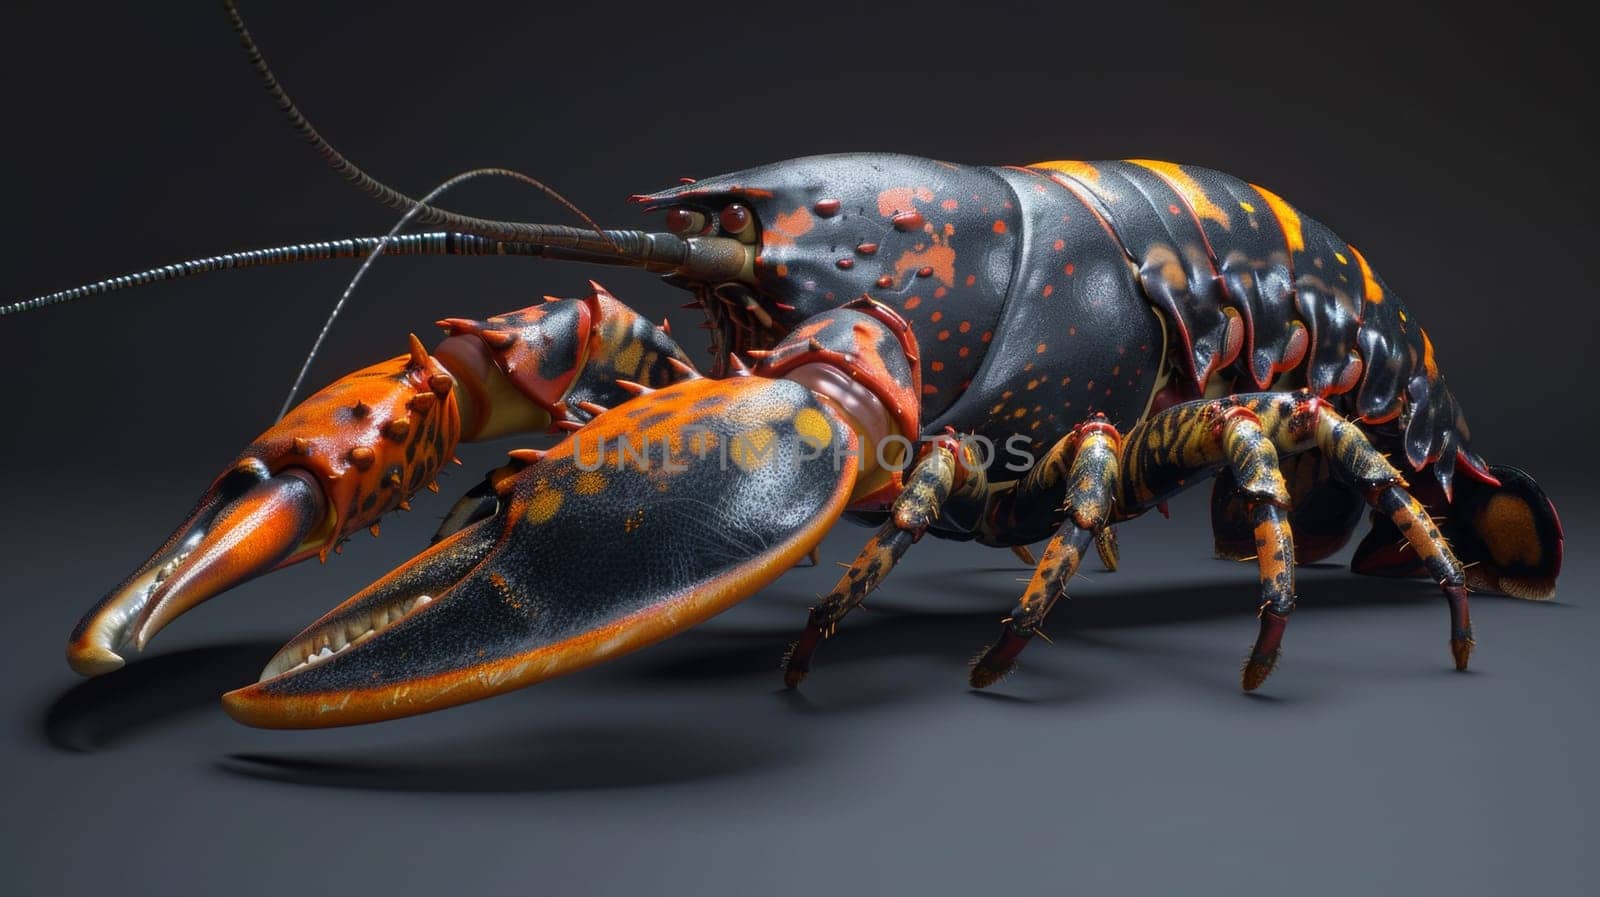 A large lobster with orange and black spots on its body